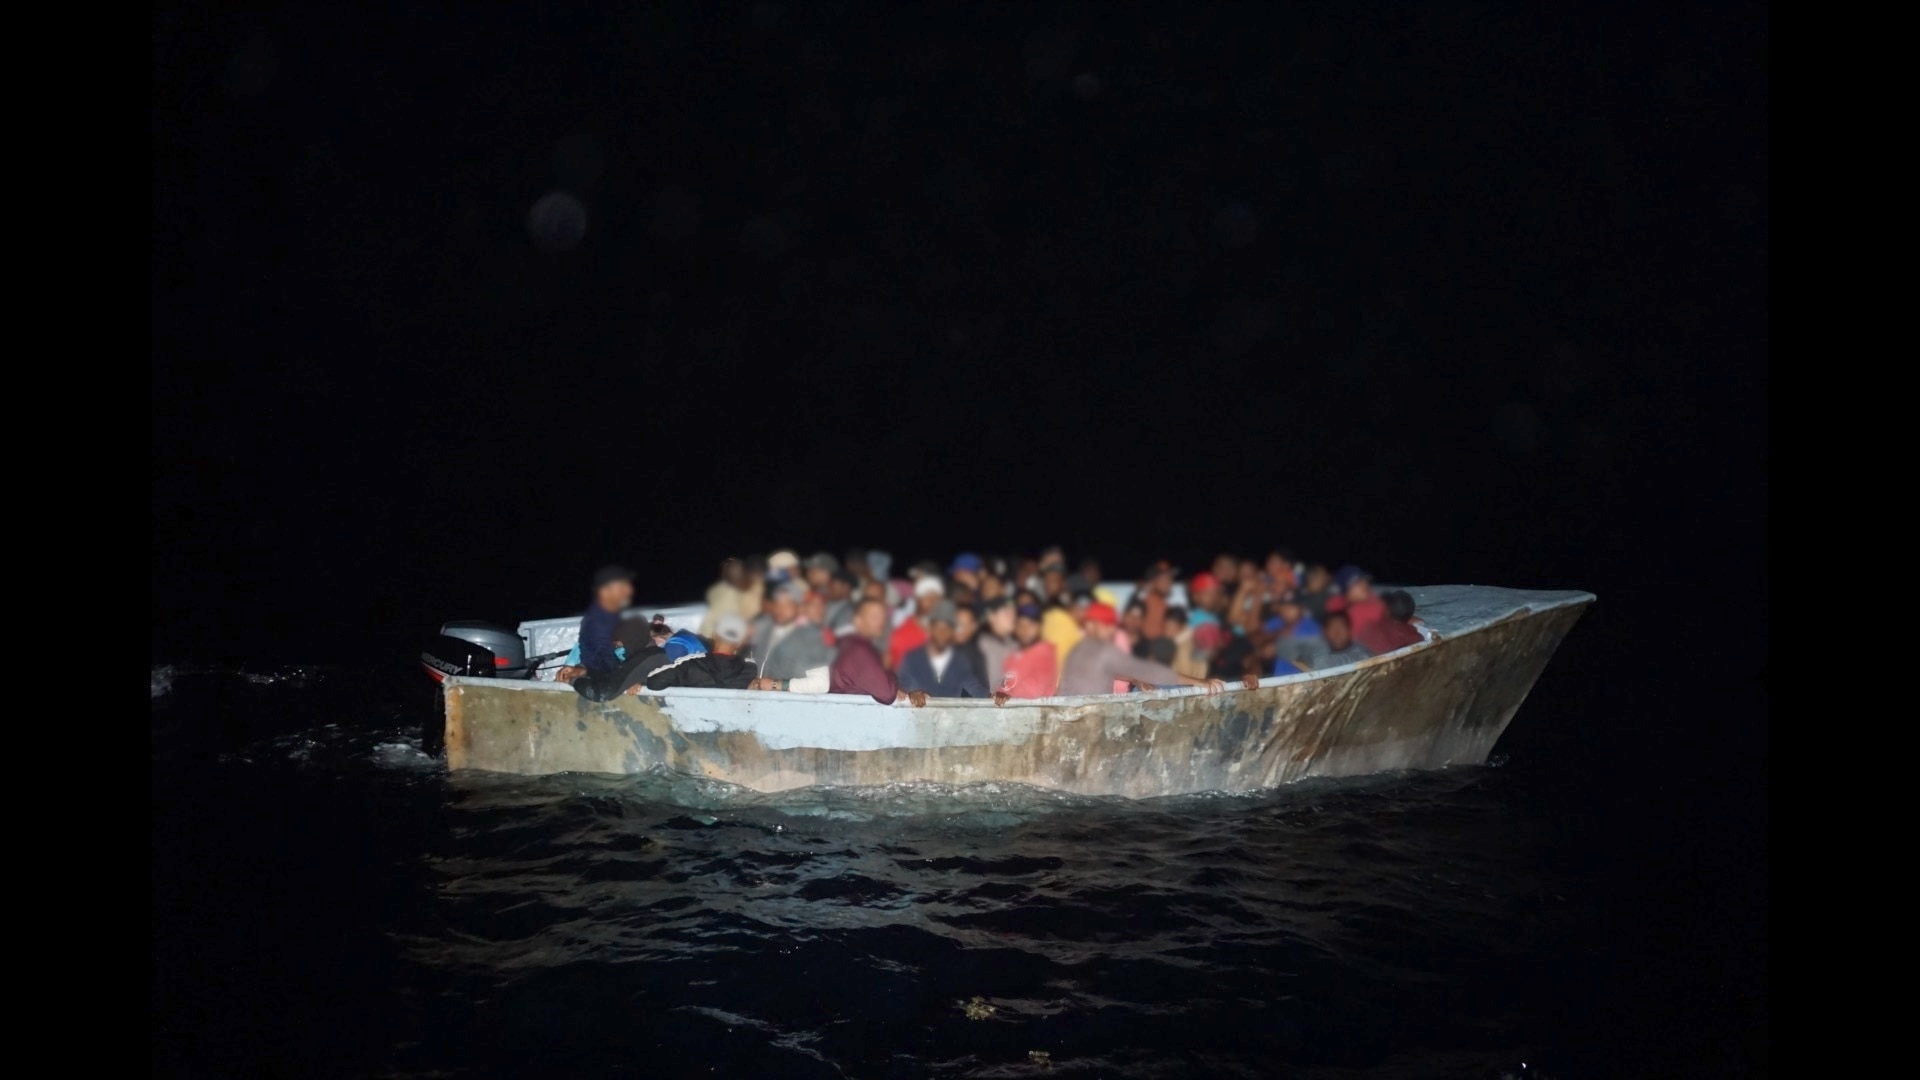 Coast Guard cutter Joseph Napier interdicts a grossly overloaded makeshift migrant vessel with 64 people northwest of Aguadilla, Puerto Rico, May 7, 2023.  The group was part of 129 other migrants, who were interdicted during five separate irregular maritime migration events in the Mona Passage between May 5 and May 8, 2023. (U.S. Coast Guard photo)